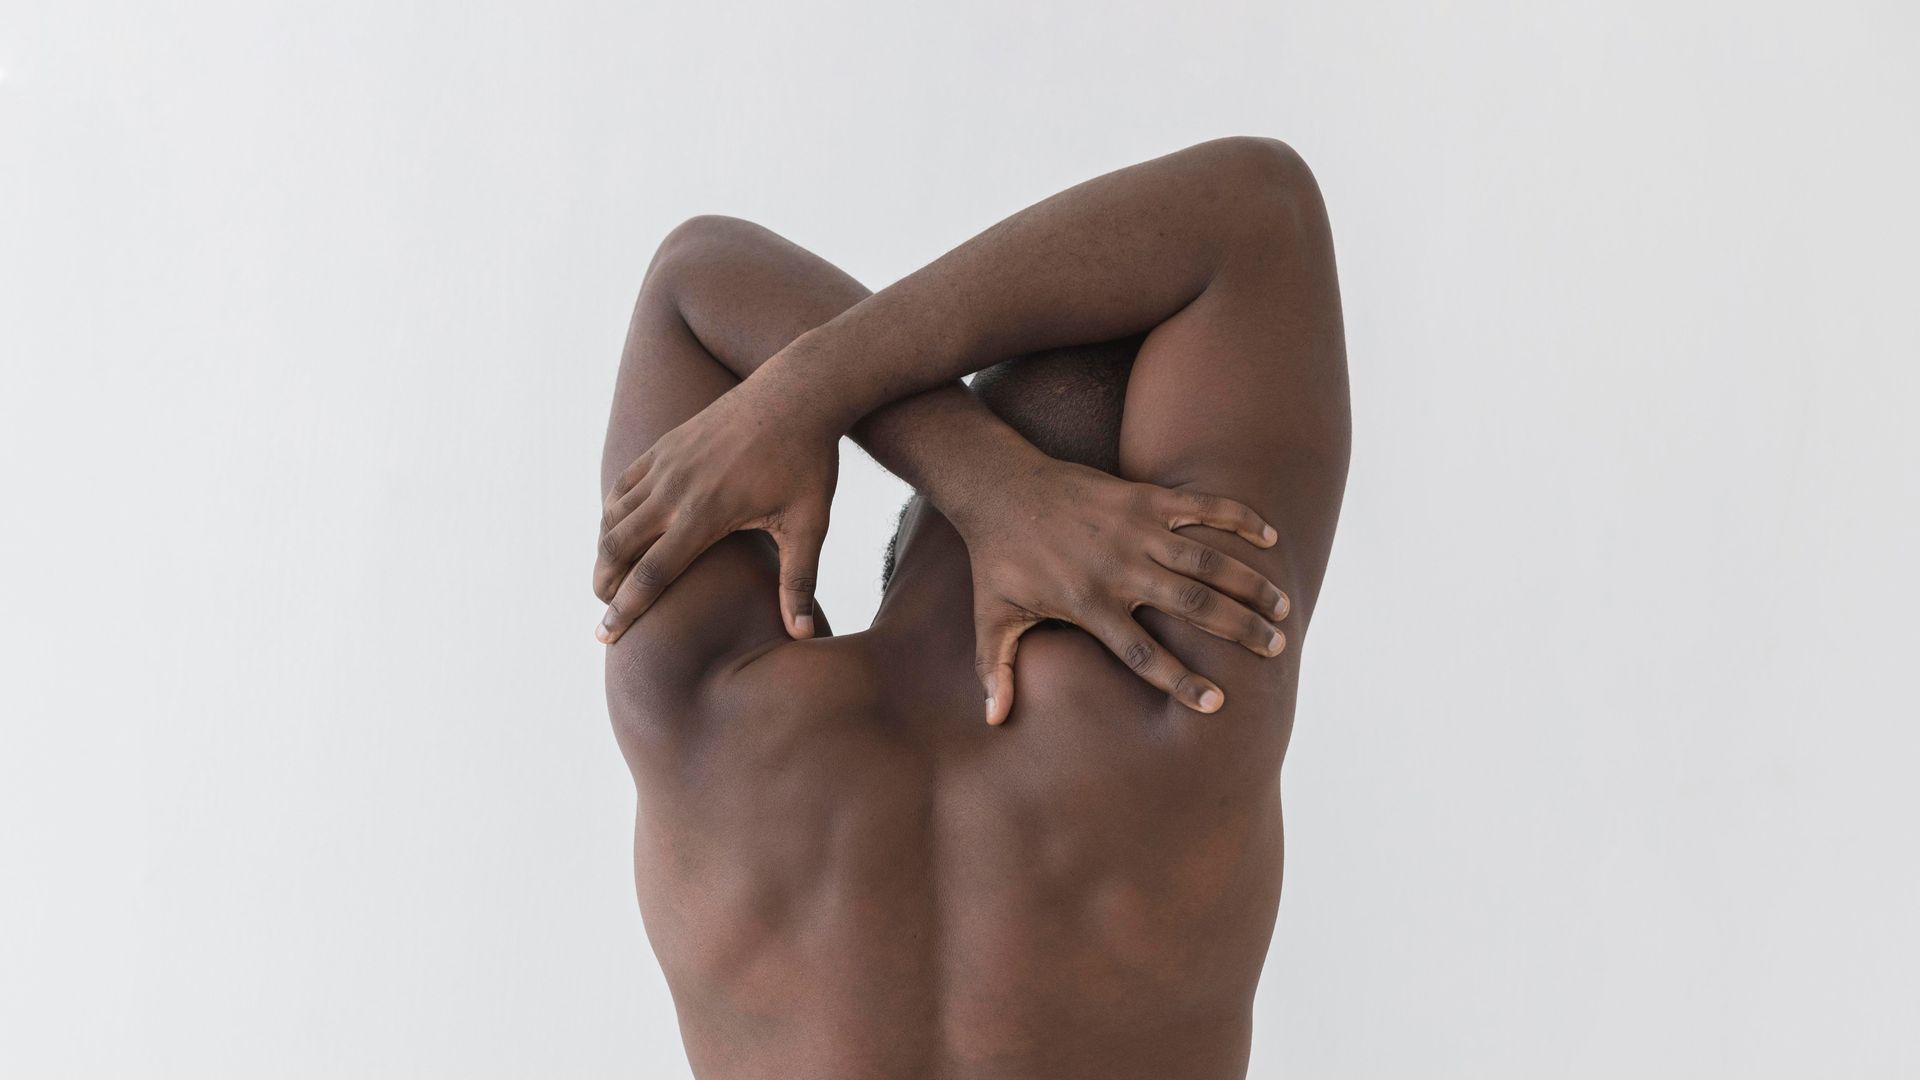 a shirtless man is stretching his arms against a white background .